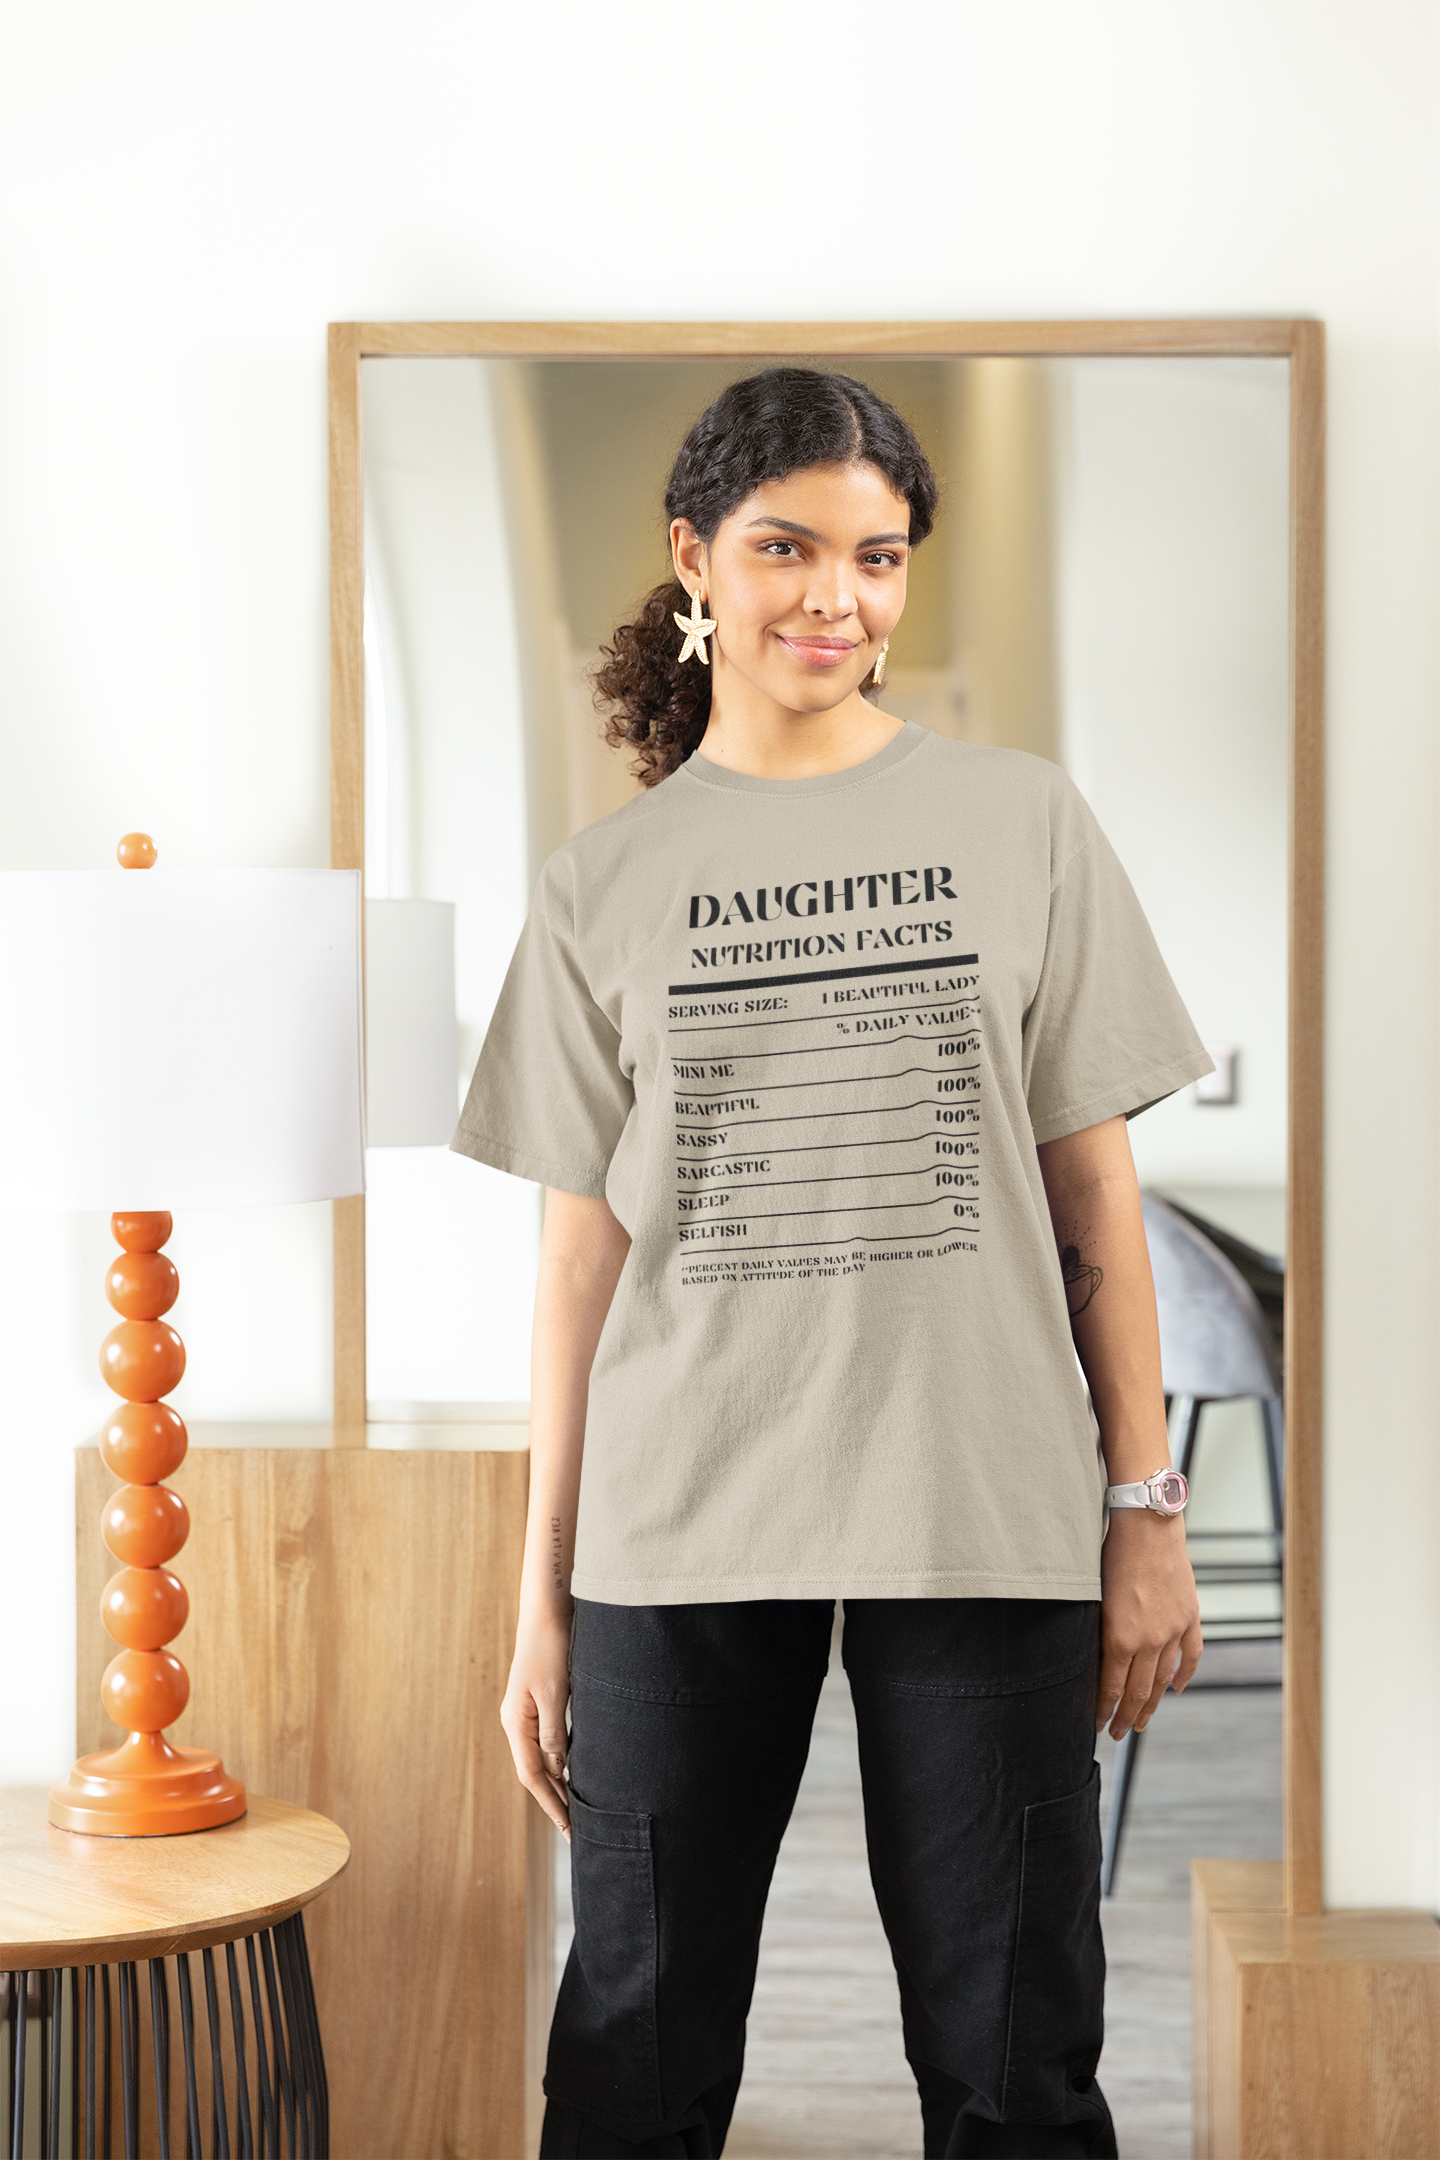 Nutrition Facts T-Shirt SS - Daughter - Black